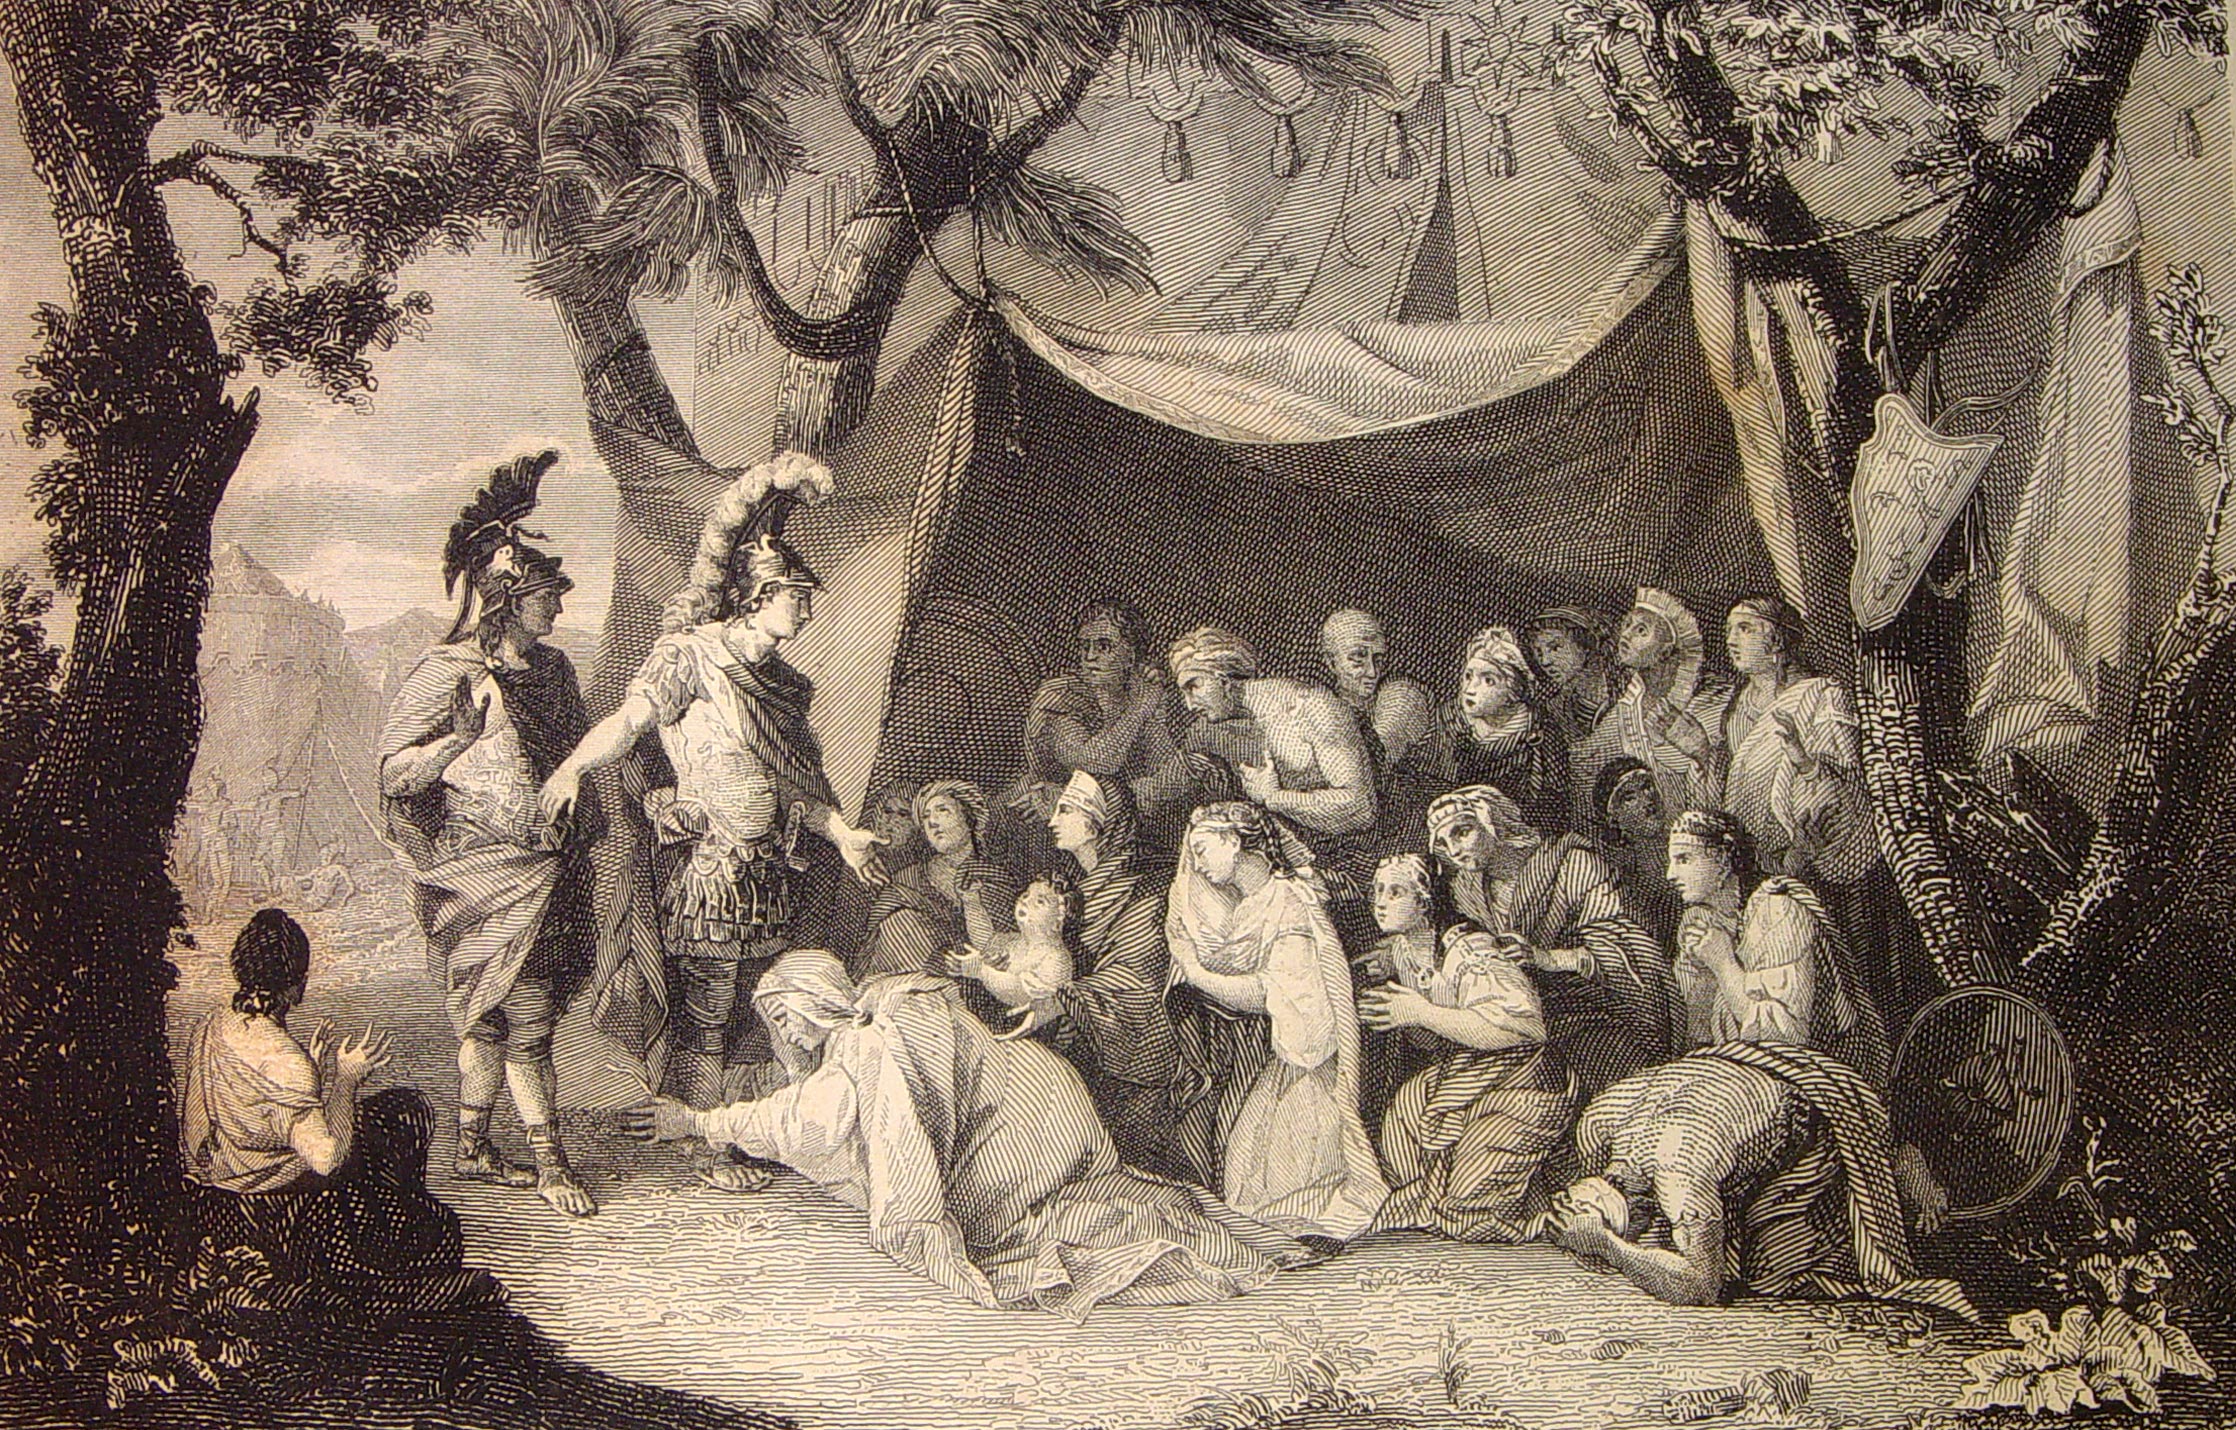 an illustration shows people, dogs and a man sitting on the ground in front of a tent